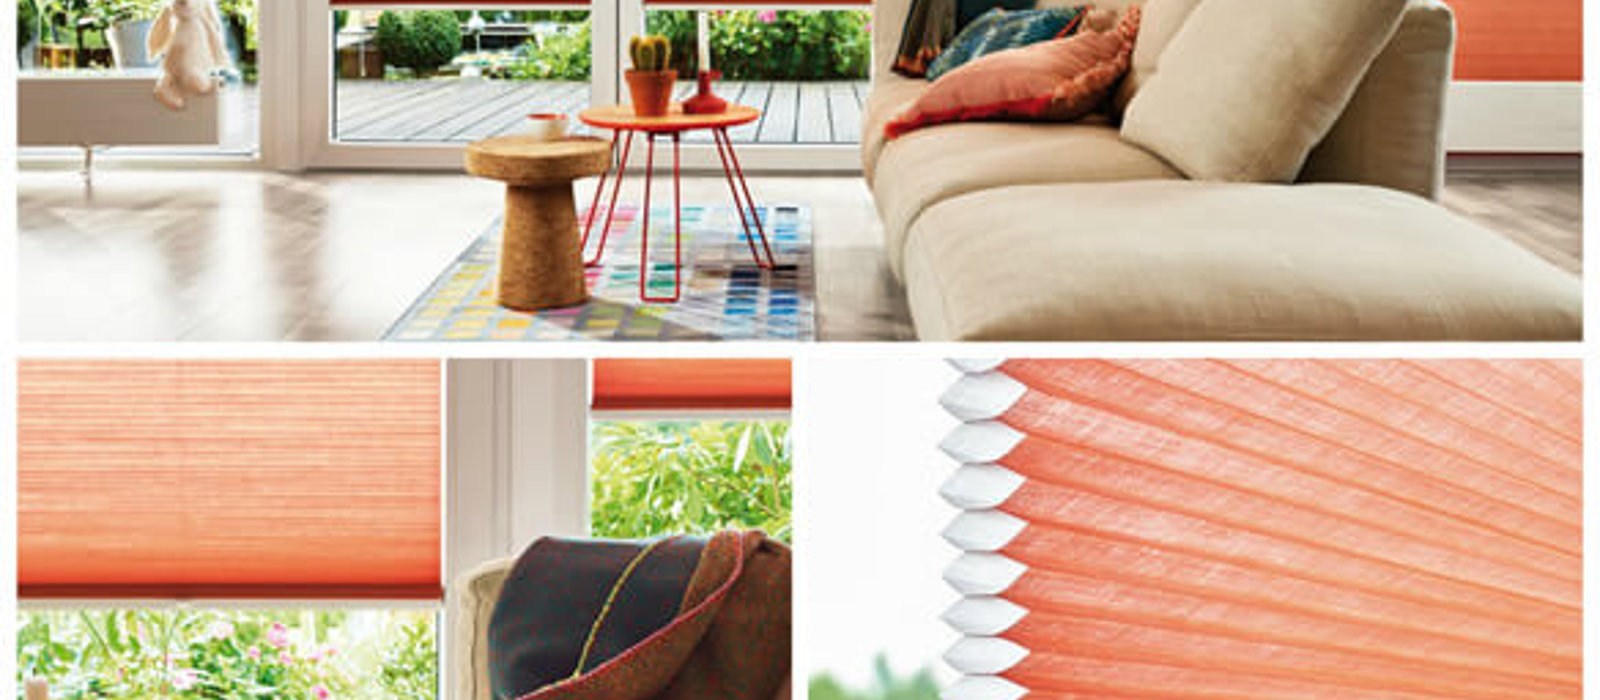 Coral Duette energy saving blinds for keeping heat out the home